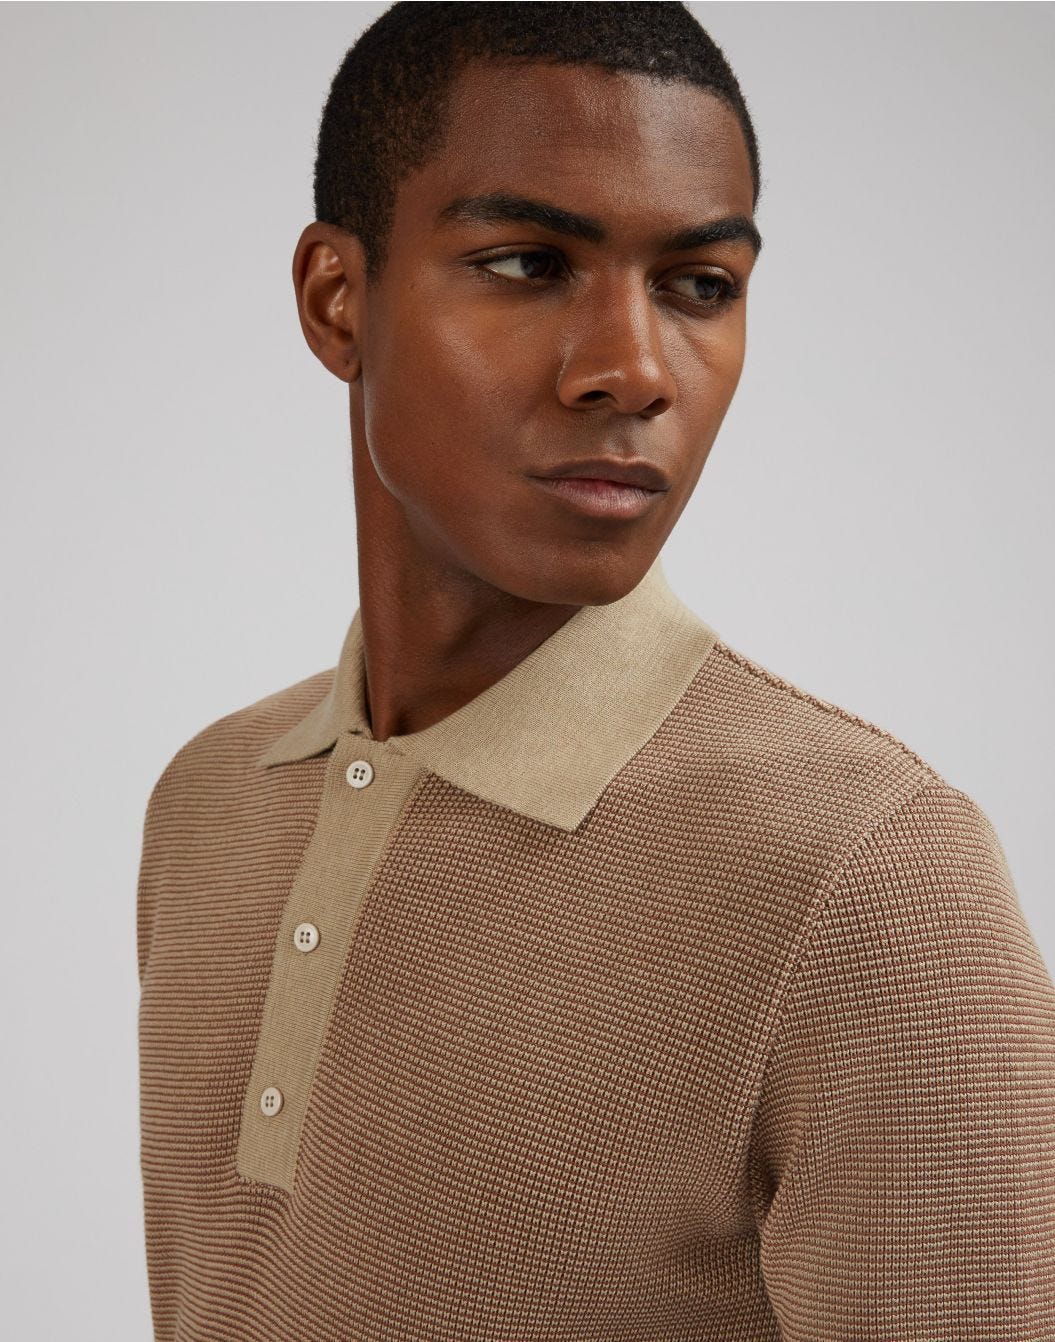 Two-tone polo shirt with a jacquard knit